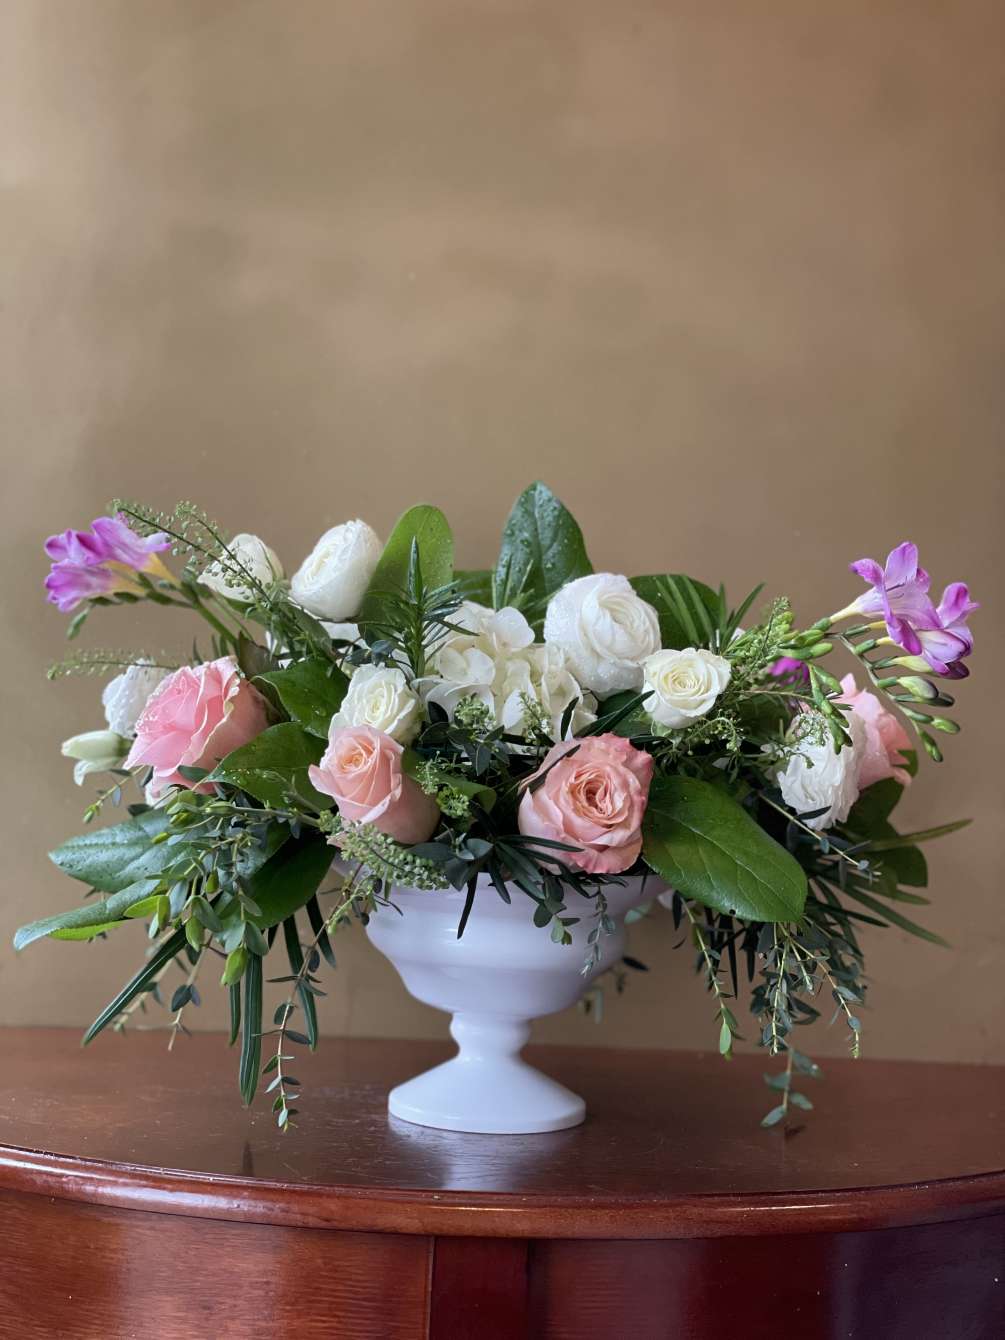 Bring beauty and peace to any occasion with this serenely elegant bouquet